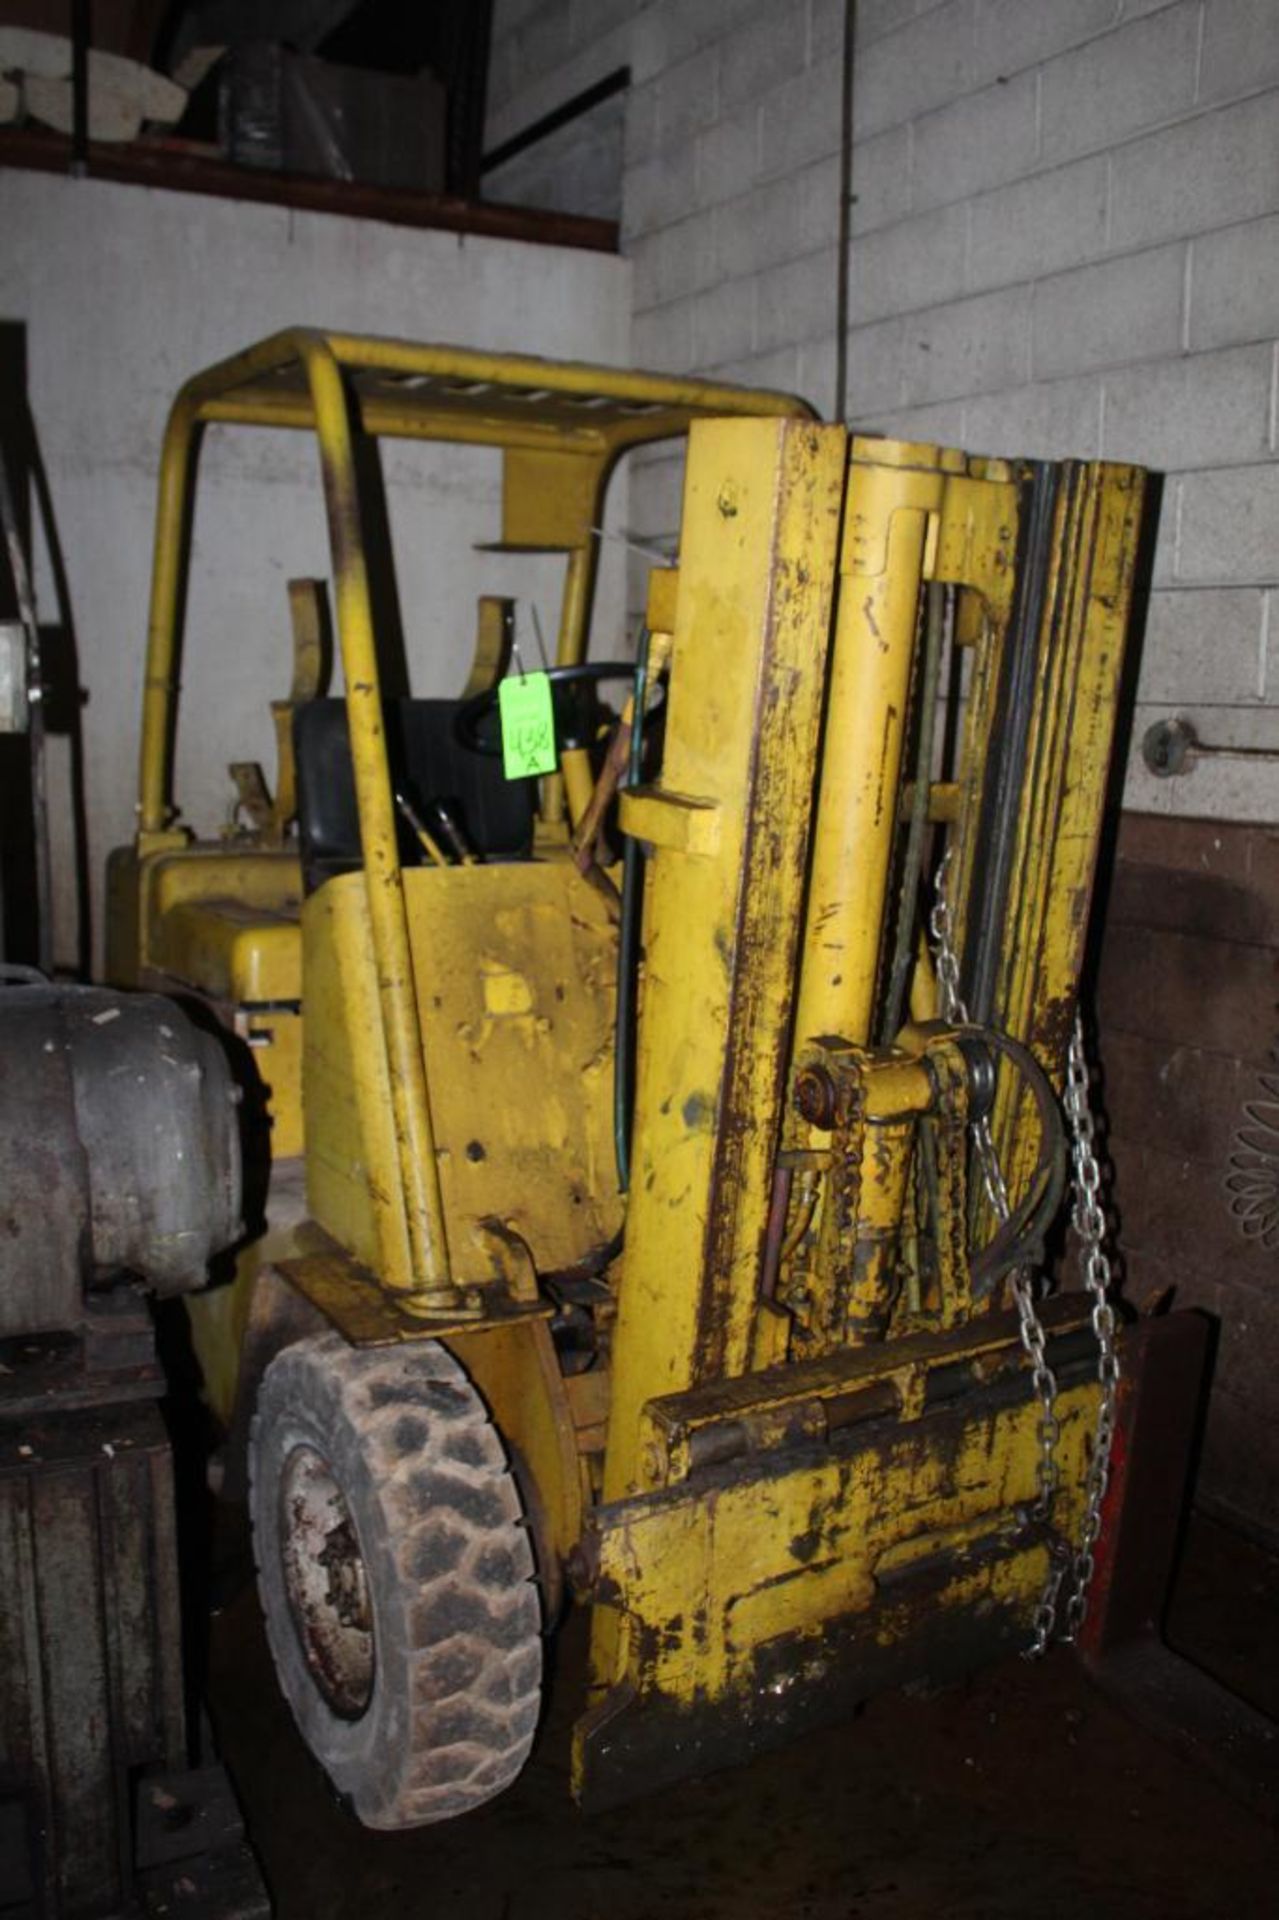 Caterpillar Tow Motor Forklift - Runs but has hydraulic issues and overheats